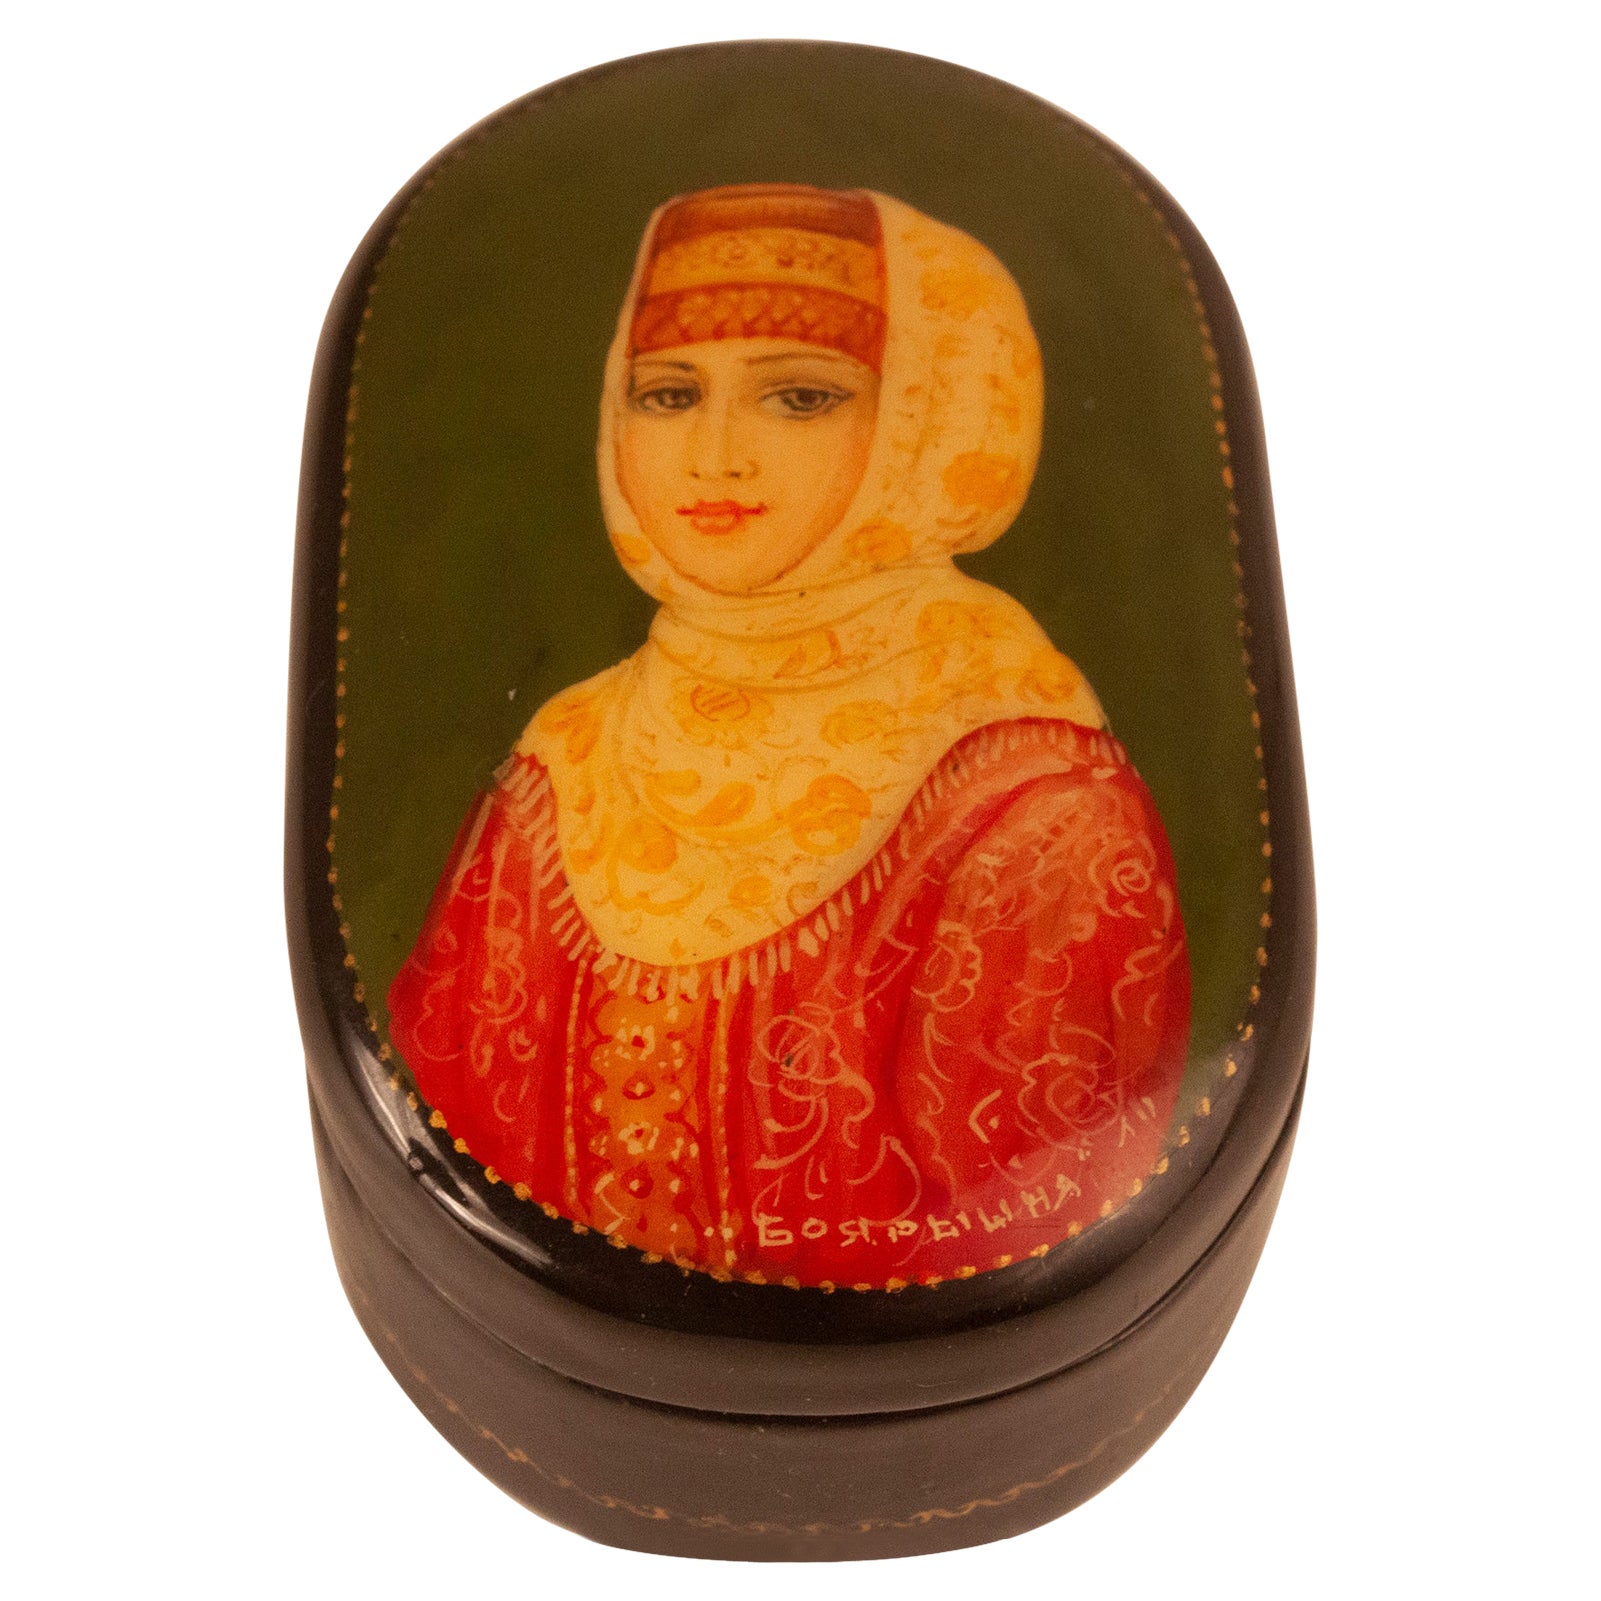 Where are Russian lacquer boxes made?